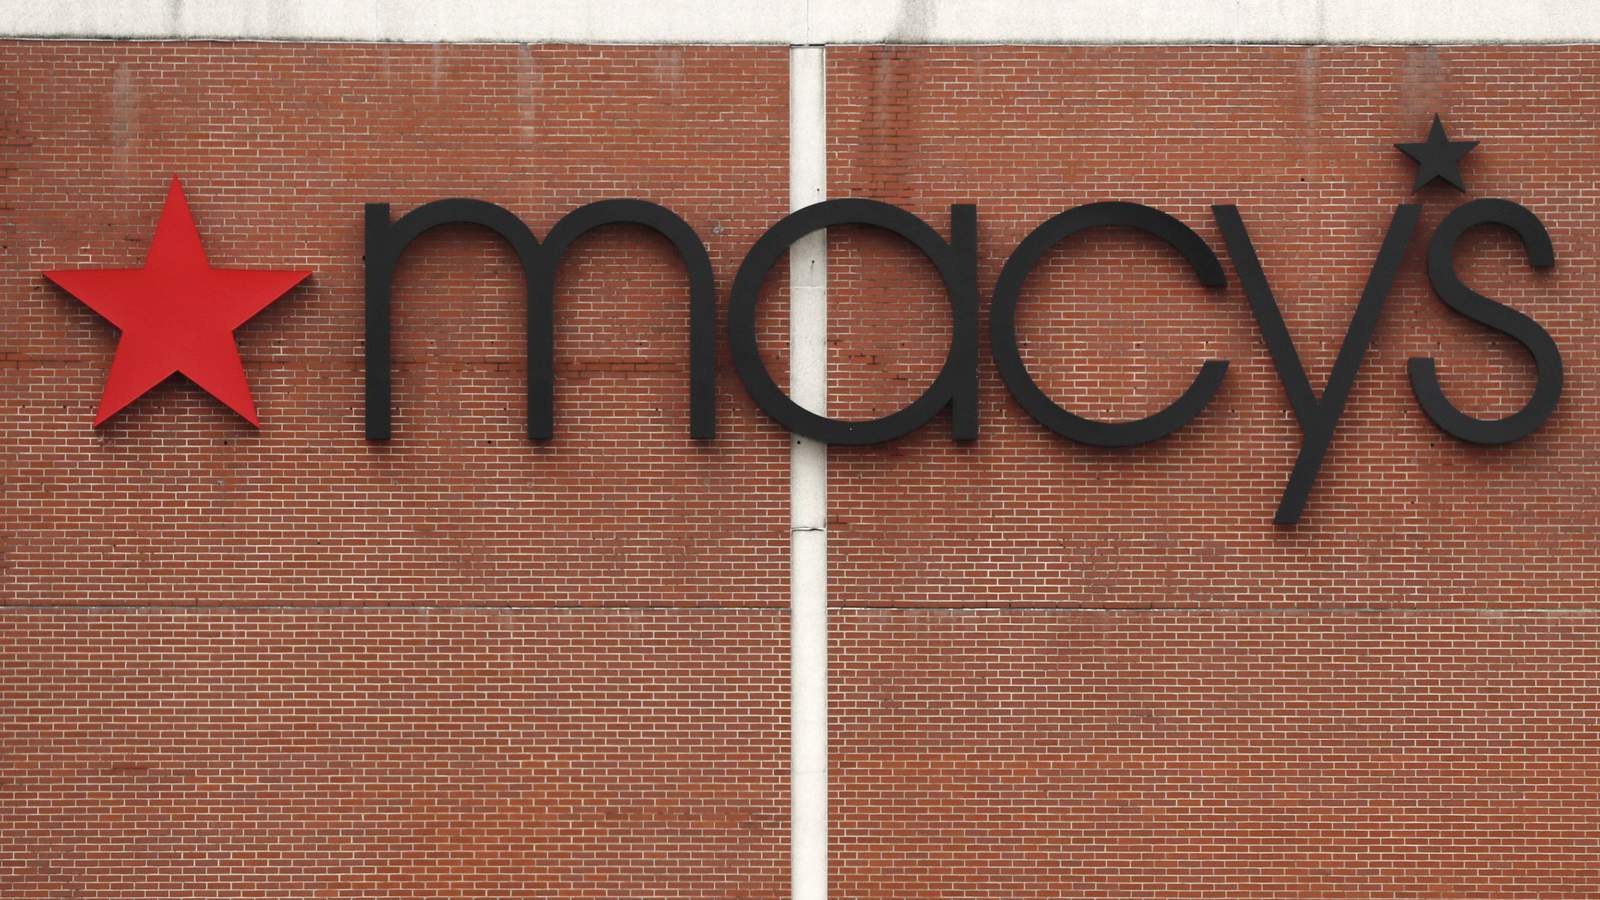 Macy’s plans to close 45 more stores this year